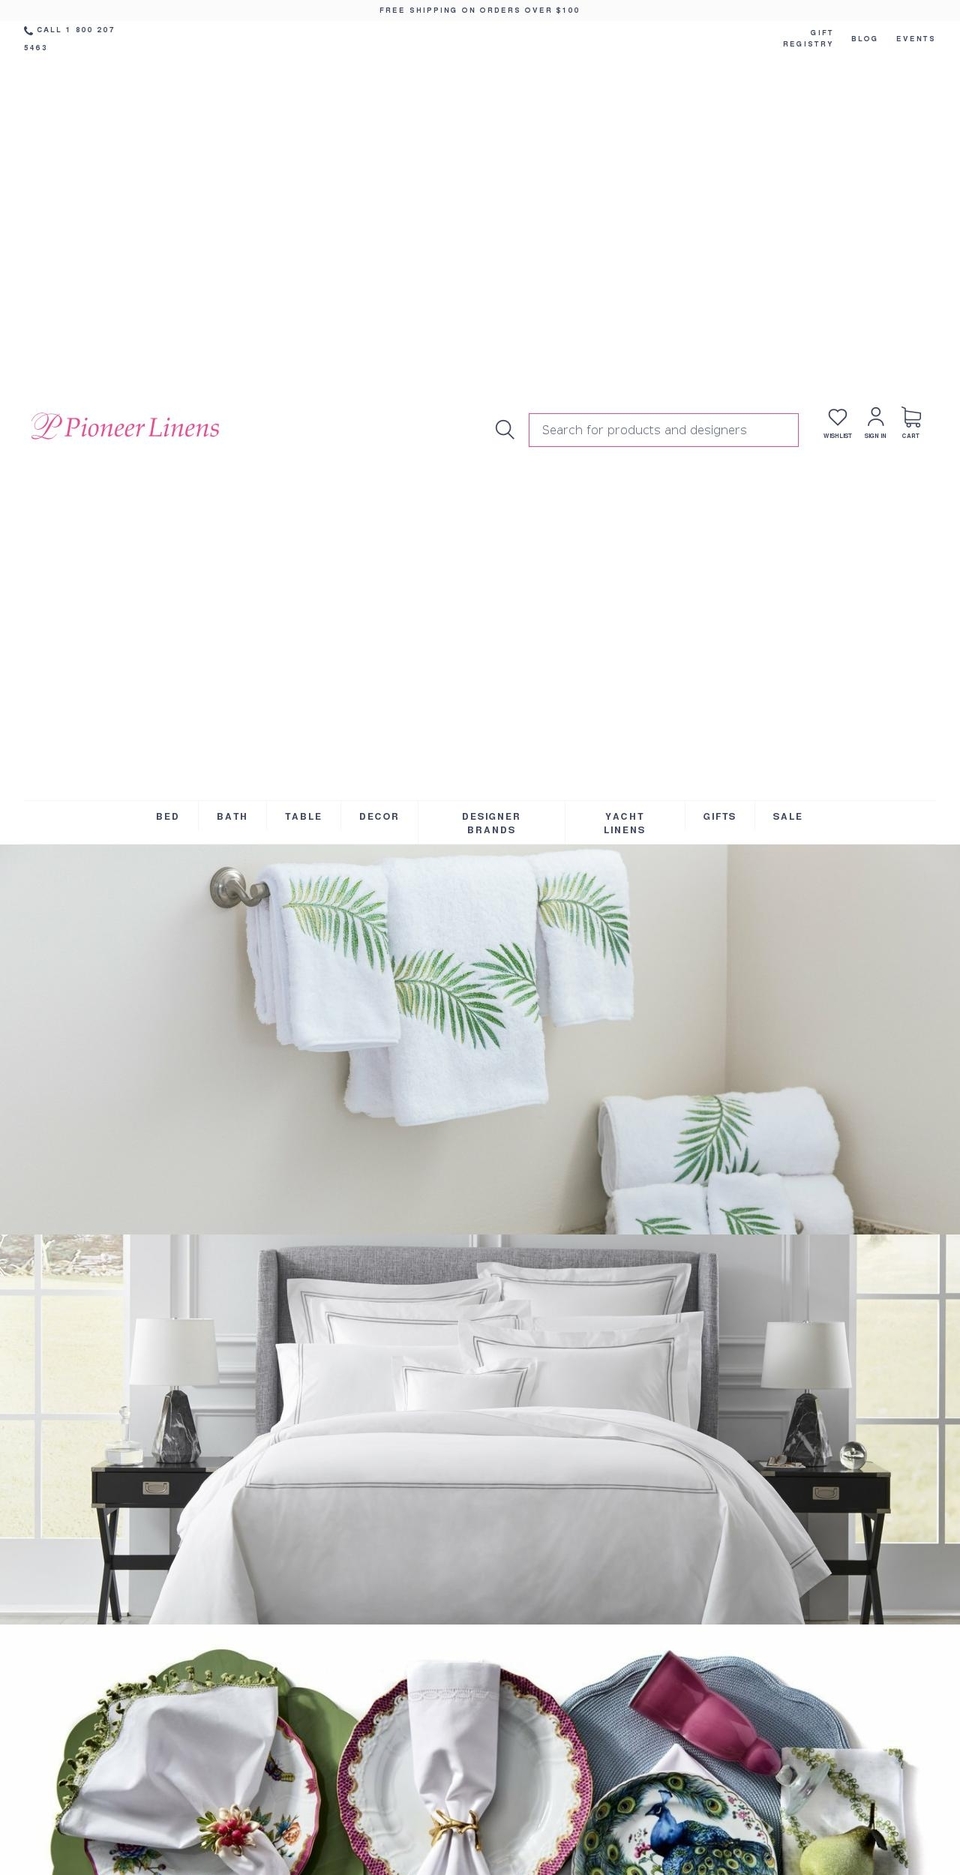 Buko Shopify Theme - Products Consolidation Shopify theme site example southfloridalinens.com